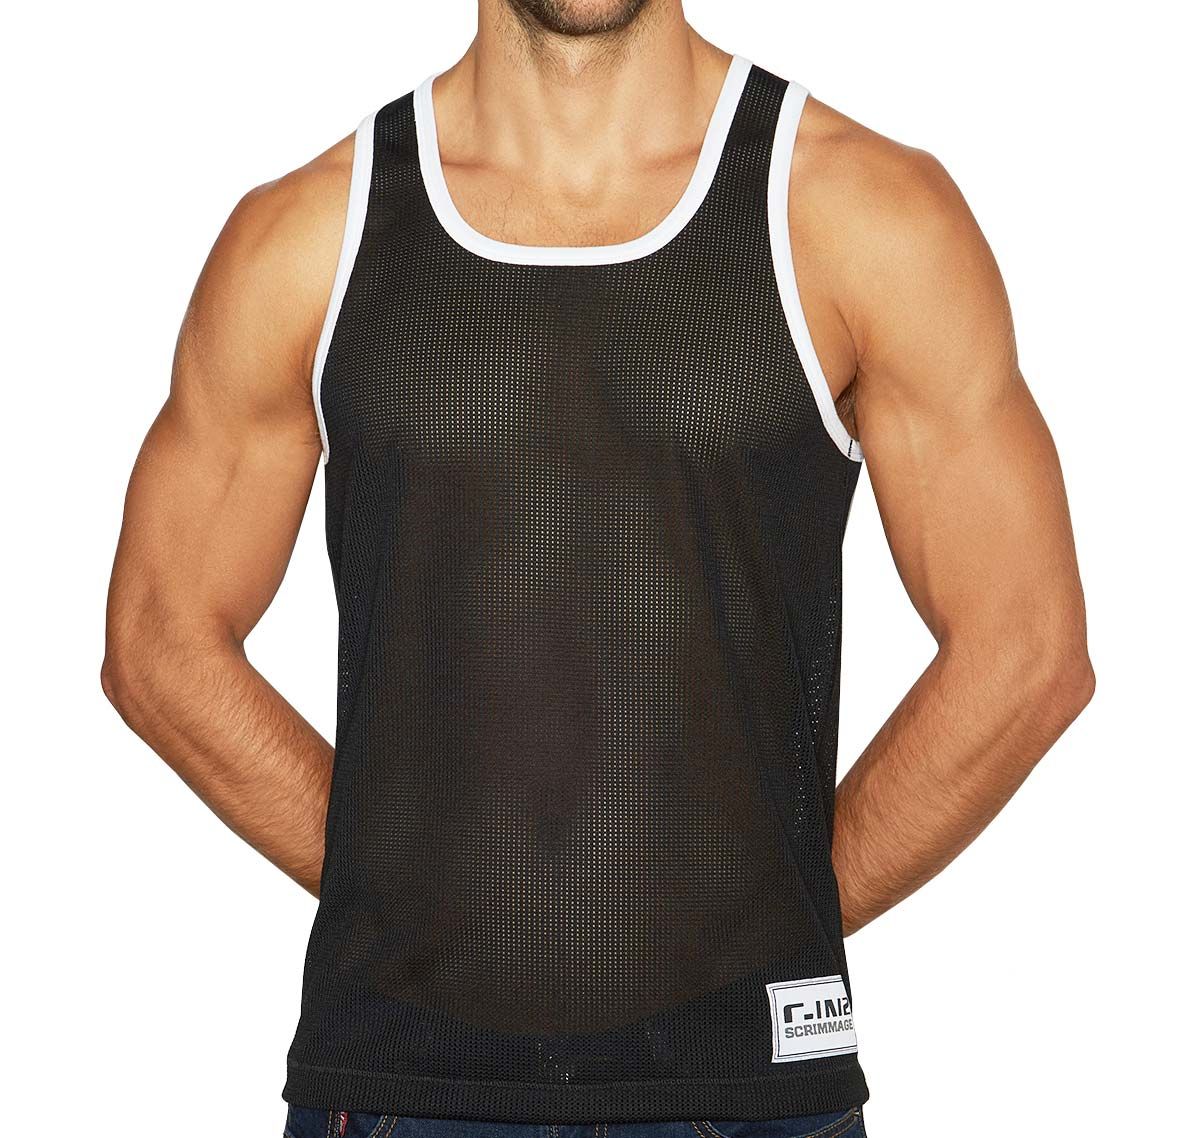 C-IN2 Tank Top SCRIMMAGE RELAXED TANK 6806-002A, black